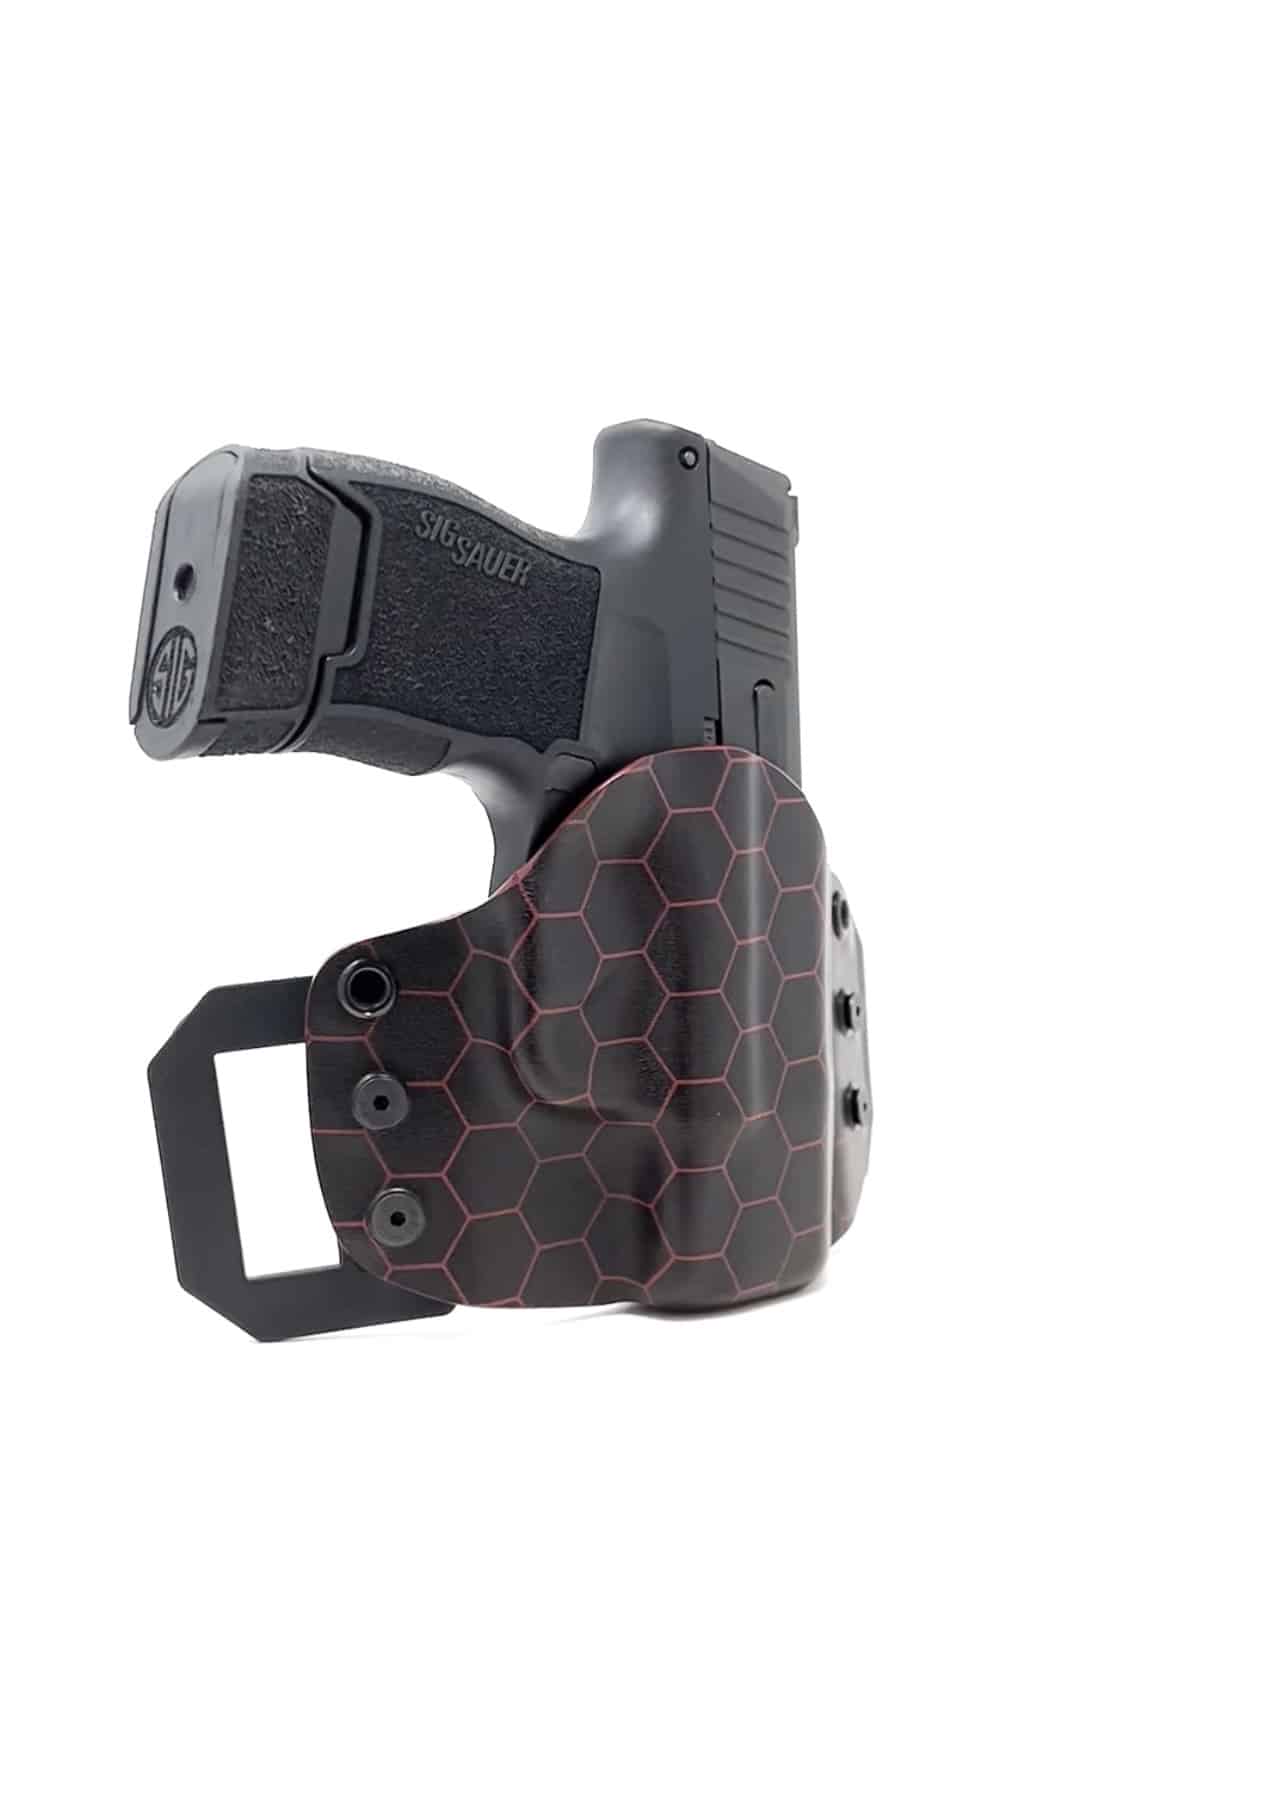 100% US Made Concealment Express OWB Paddle KYDEX Holster - Outside Waistband Adjustable Cant & Posi-Click Retention Black 